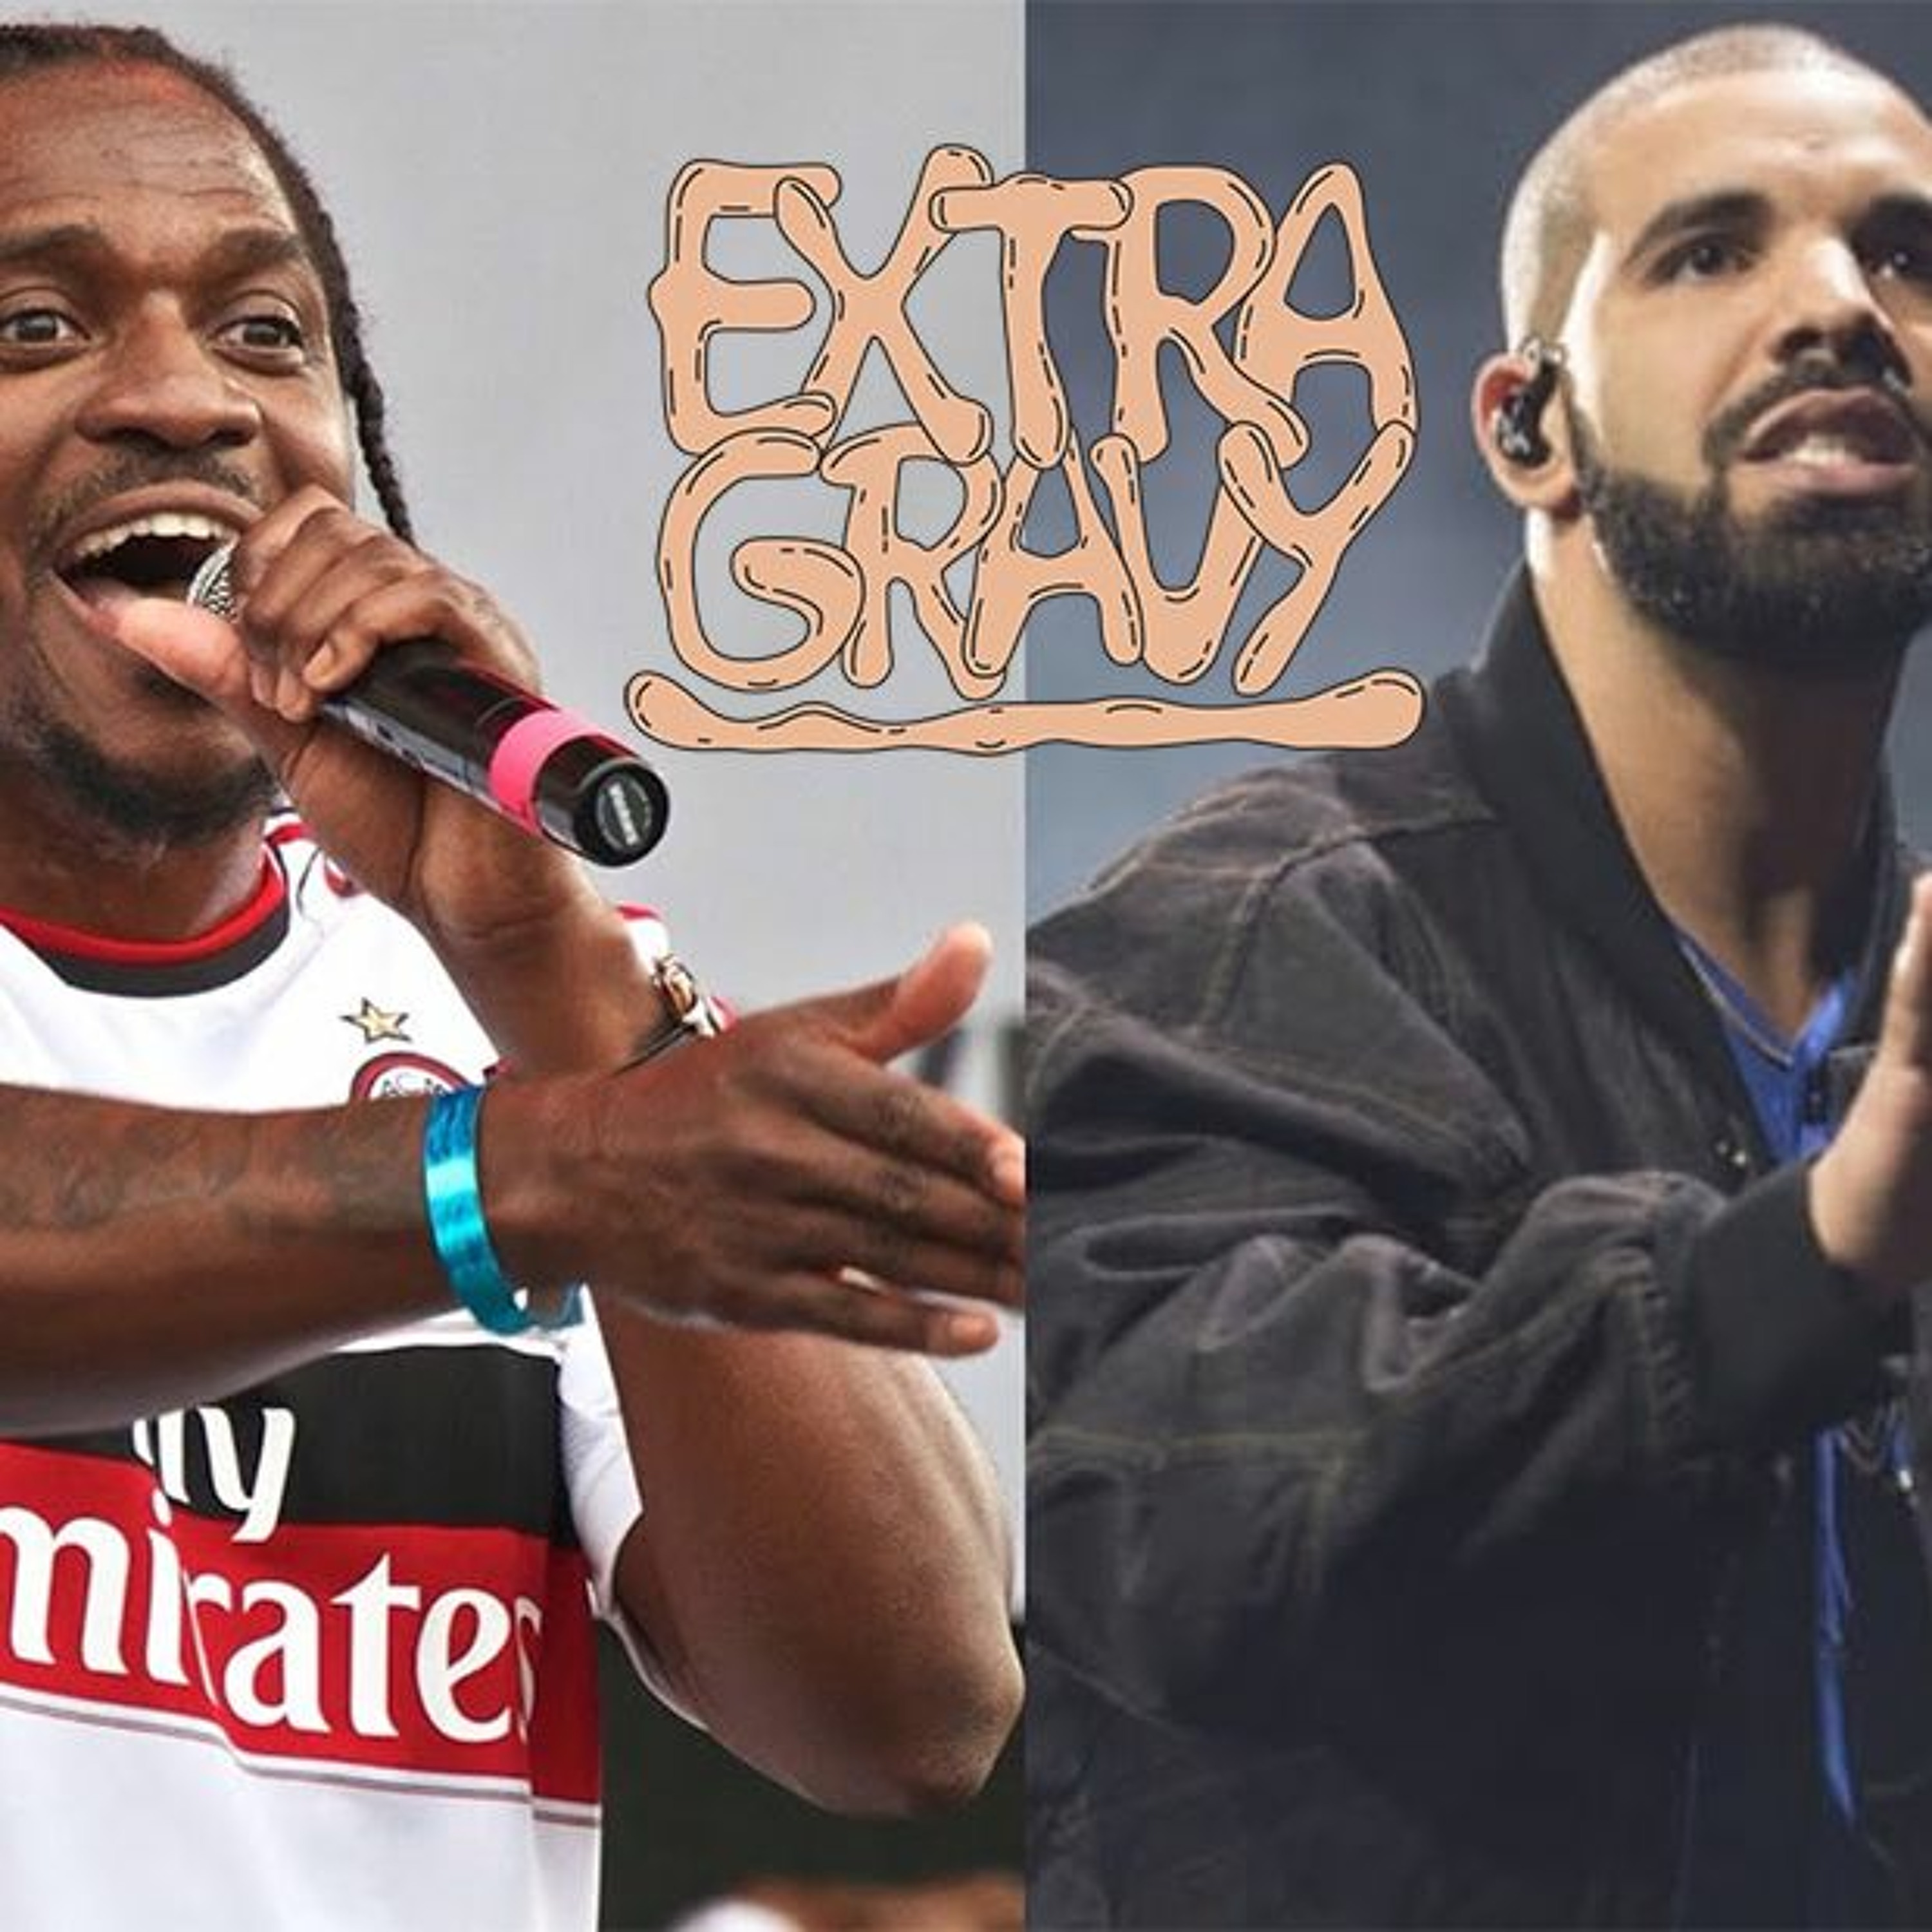 Thumbnail for "The Story of Drake and Pusha T".